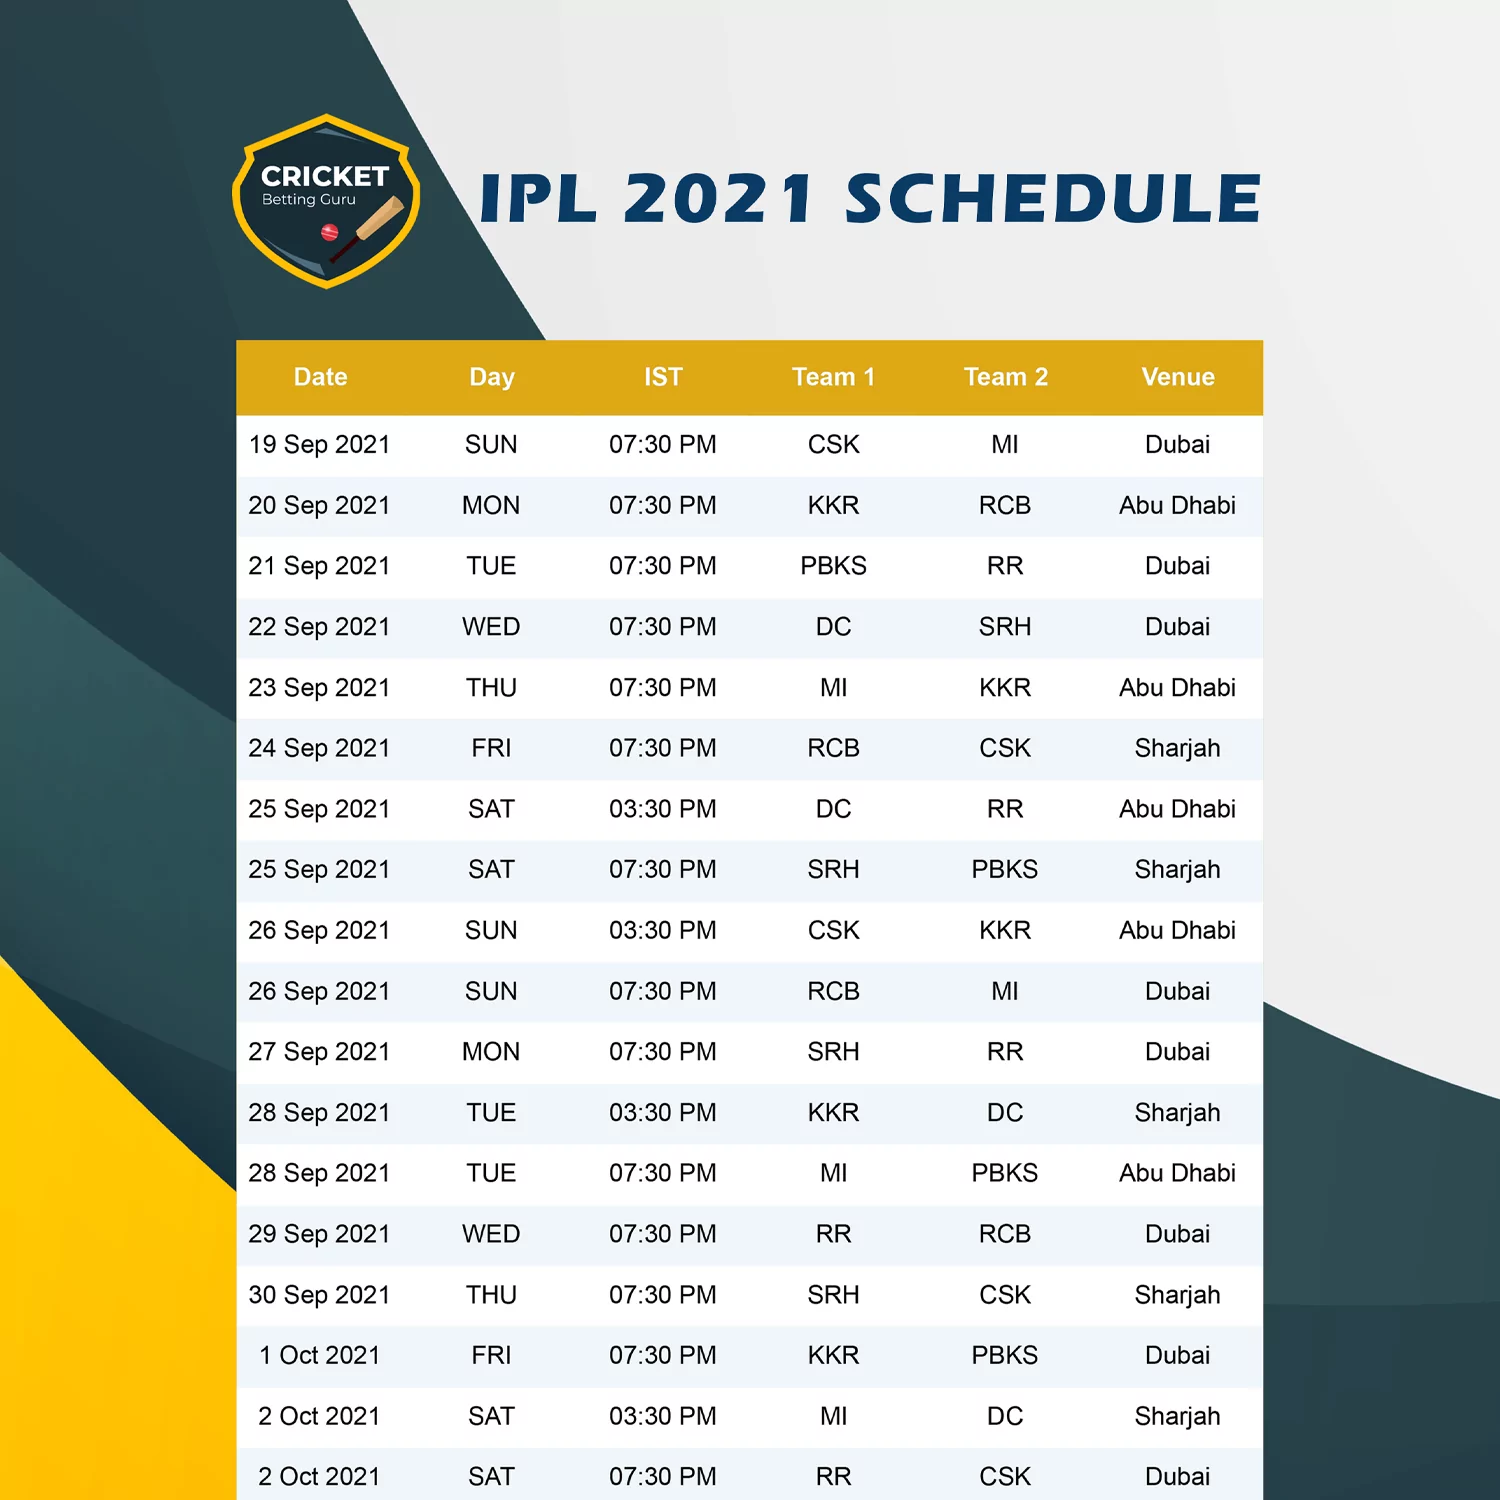 You can download IPL 2021 match schedule table to your smartphone, tablet or PC.